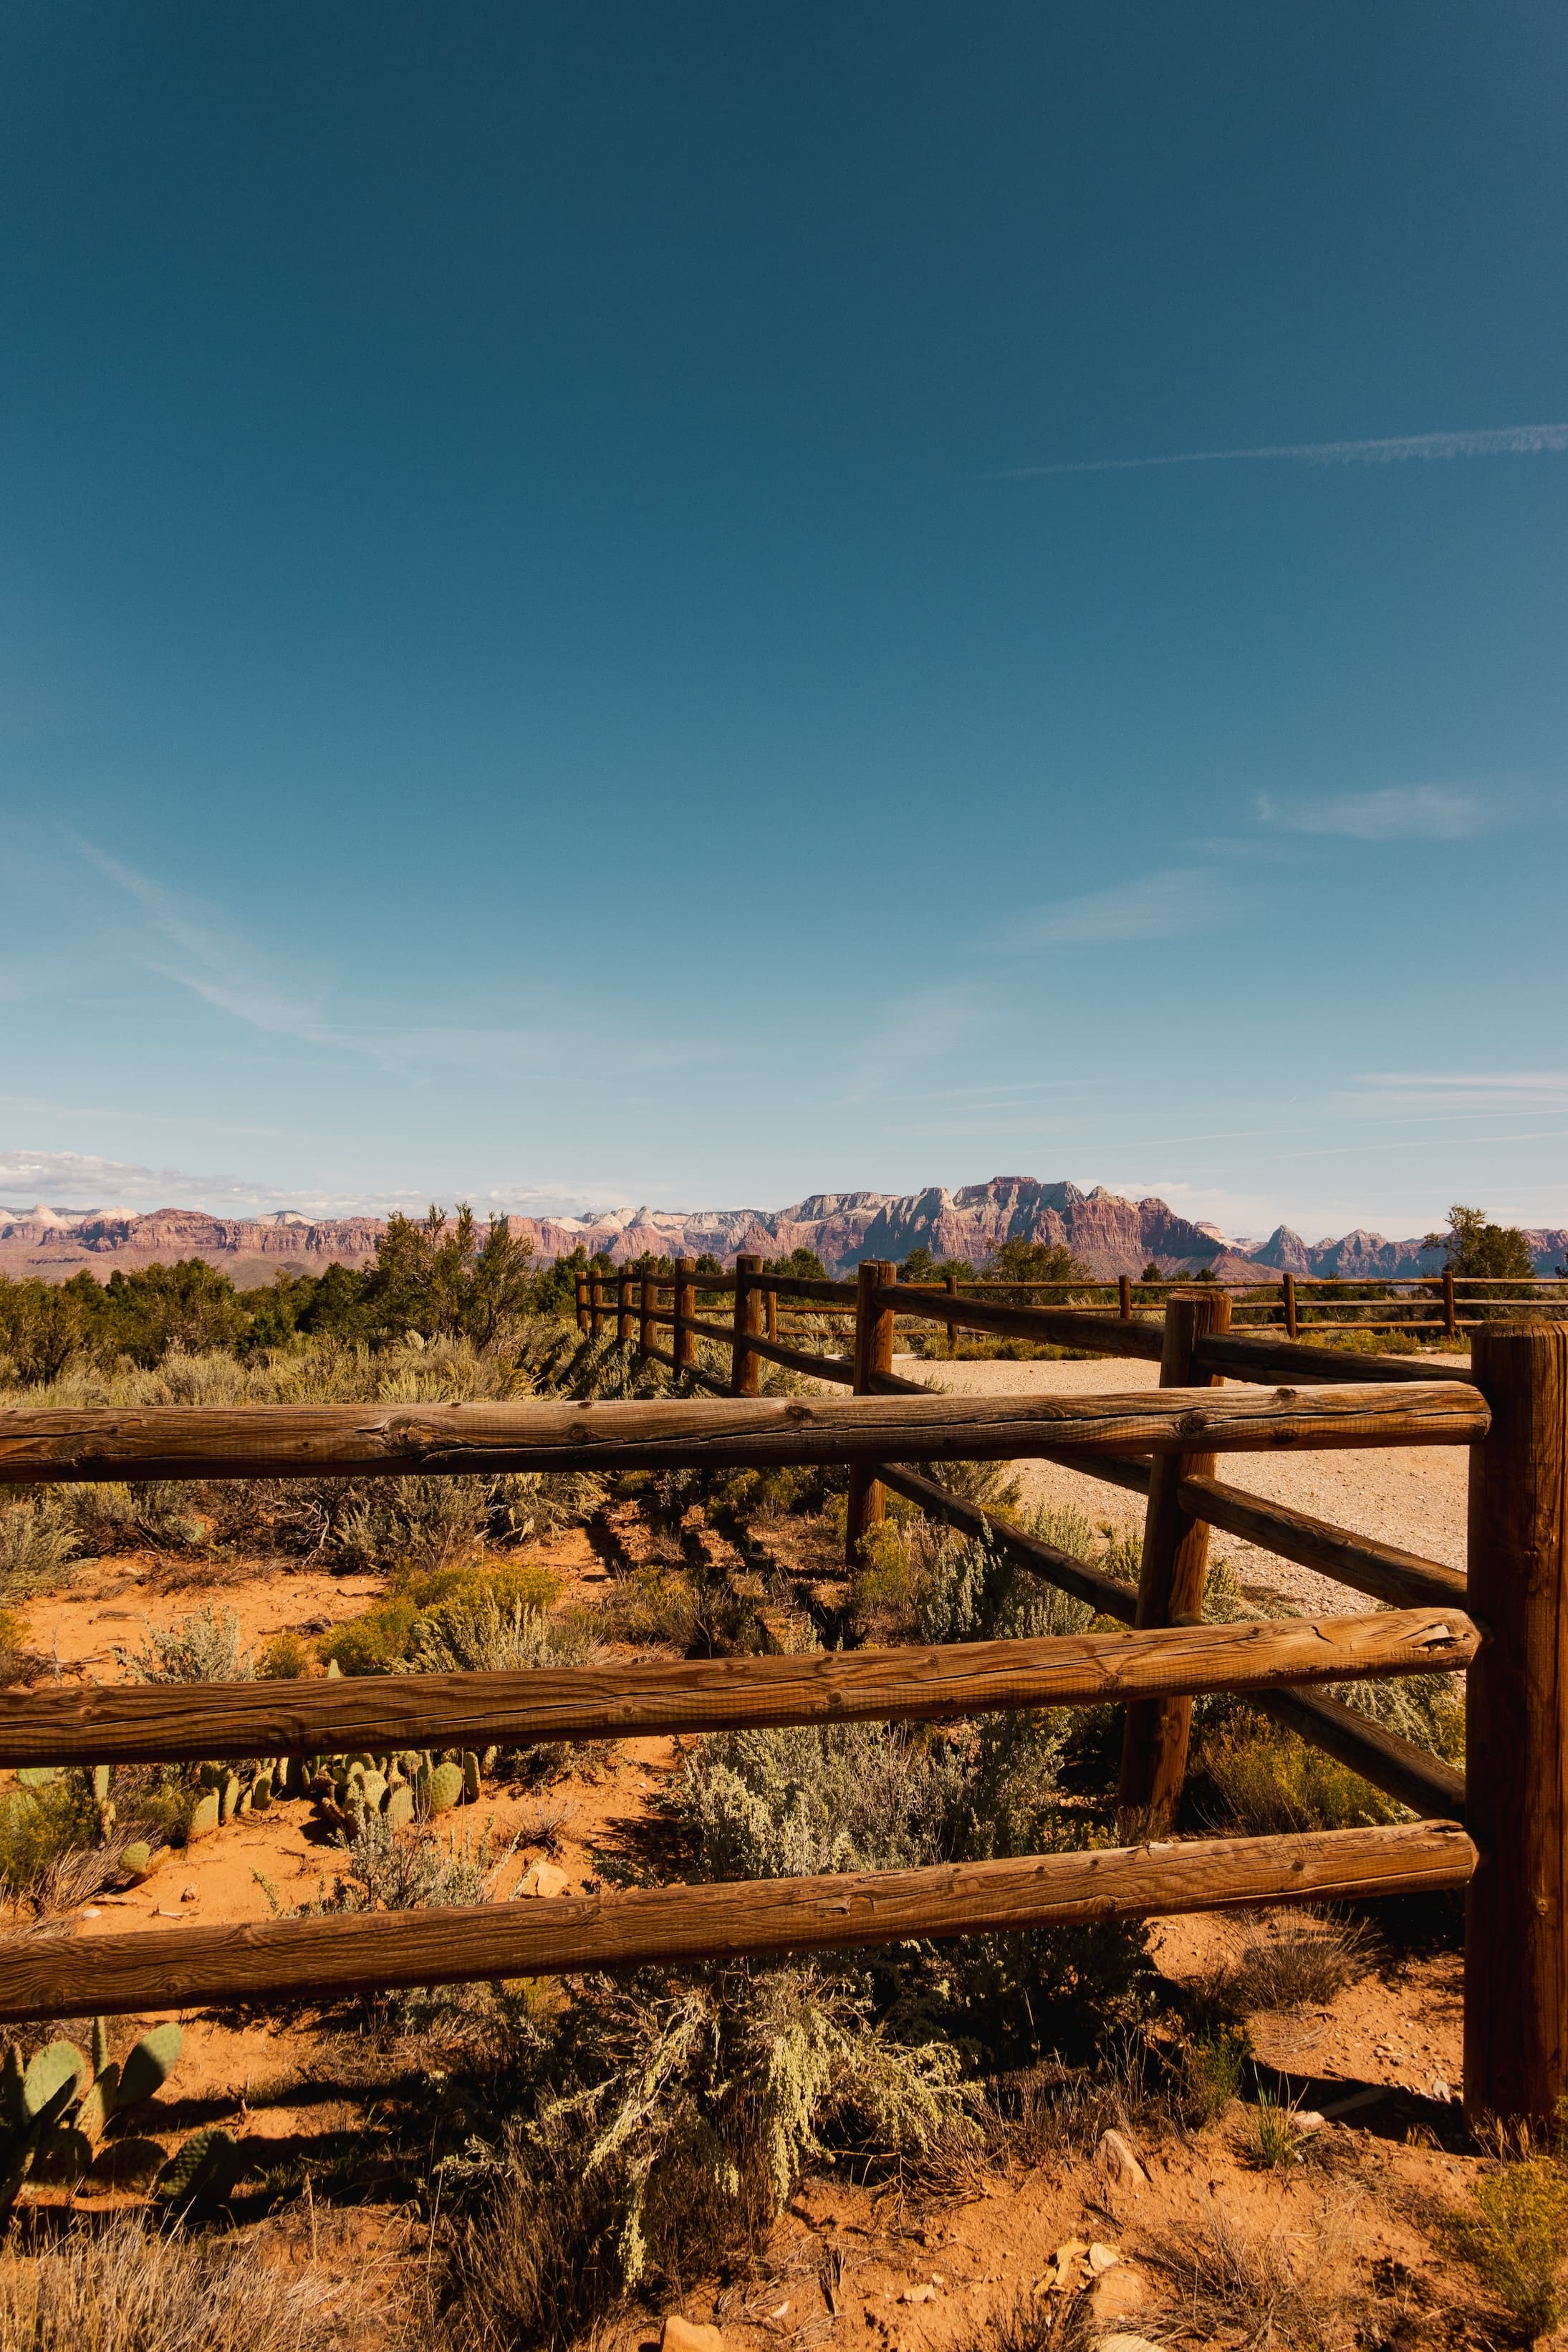 A rustic wooden fence in the foreground frames a panoramic view of distant red rock cliffs under a clear blue sky.